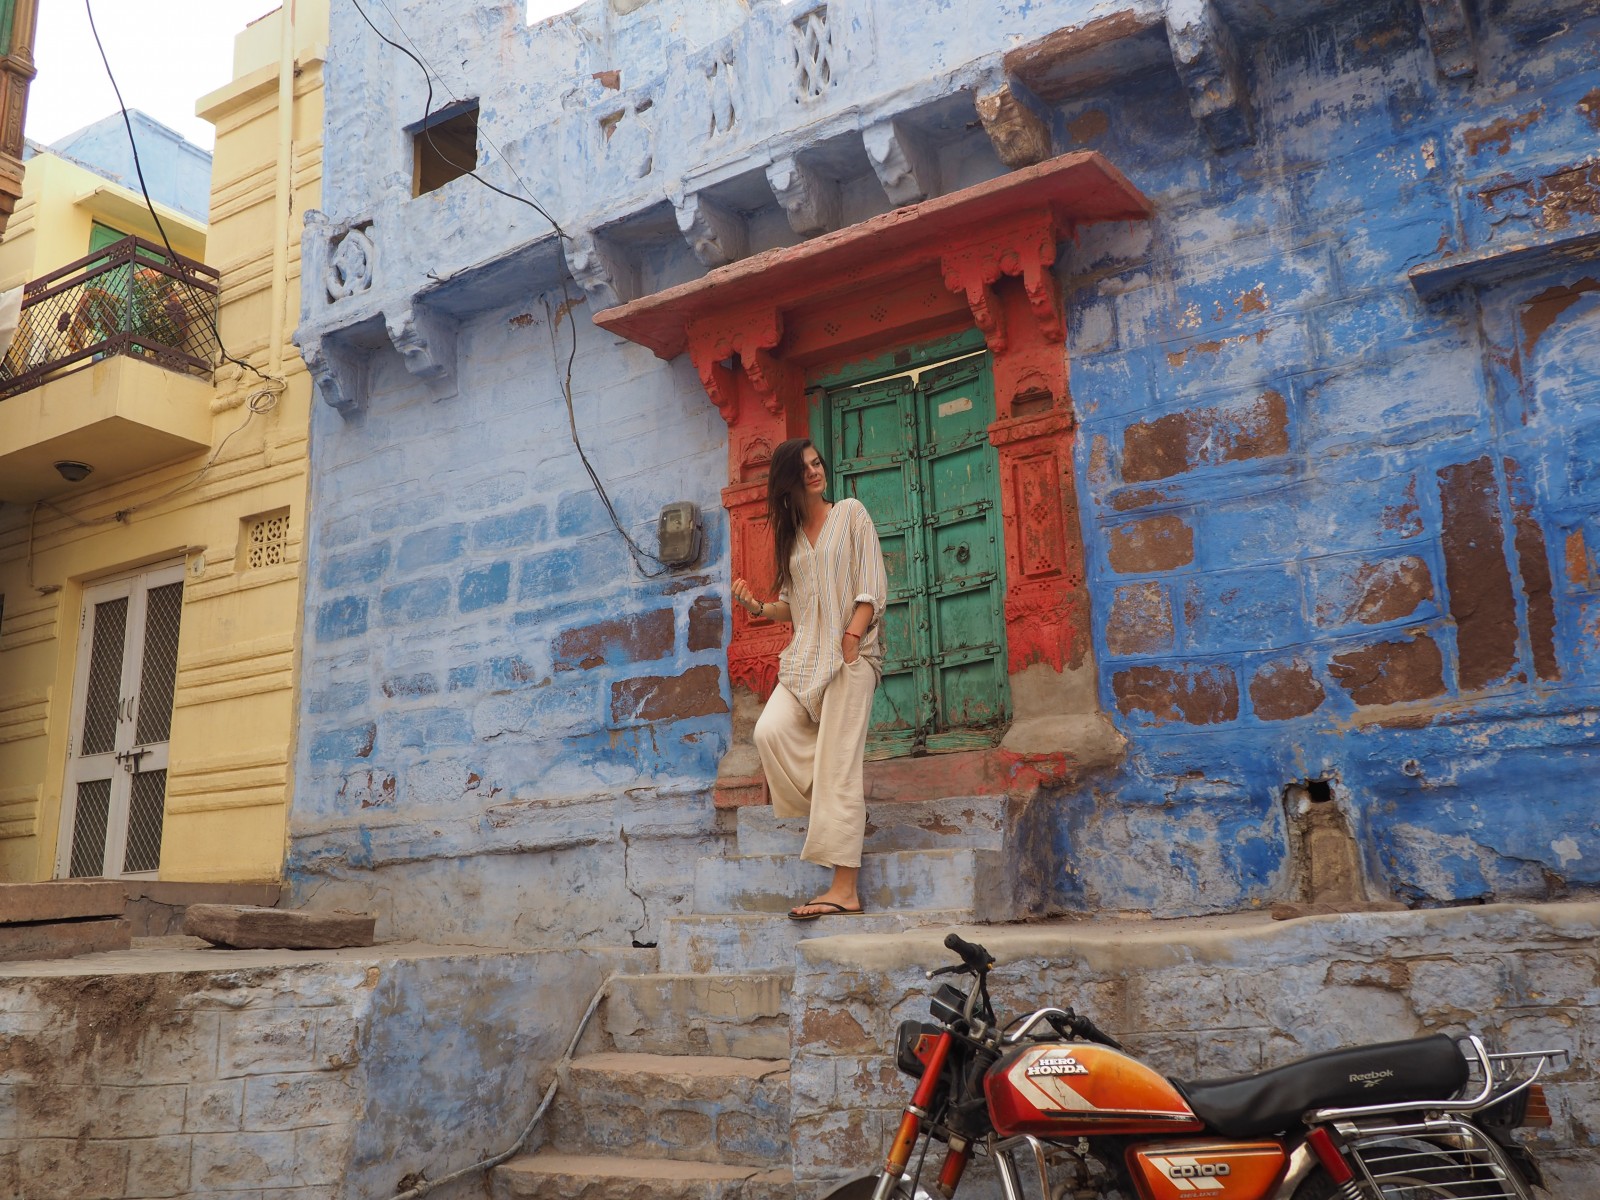 Jodhpur is a blue city in India